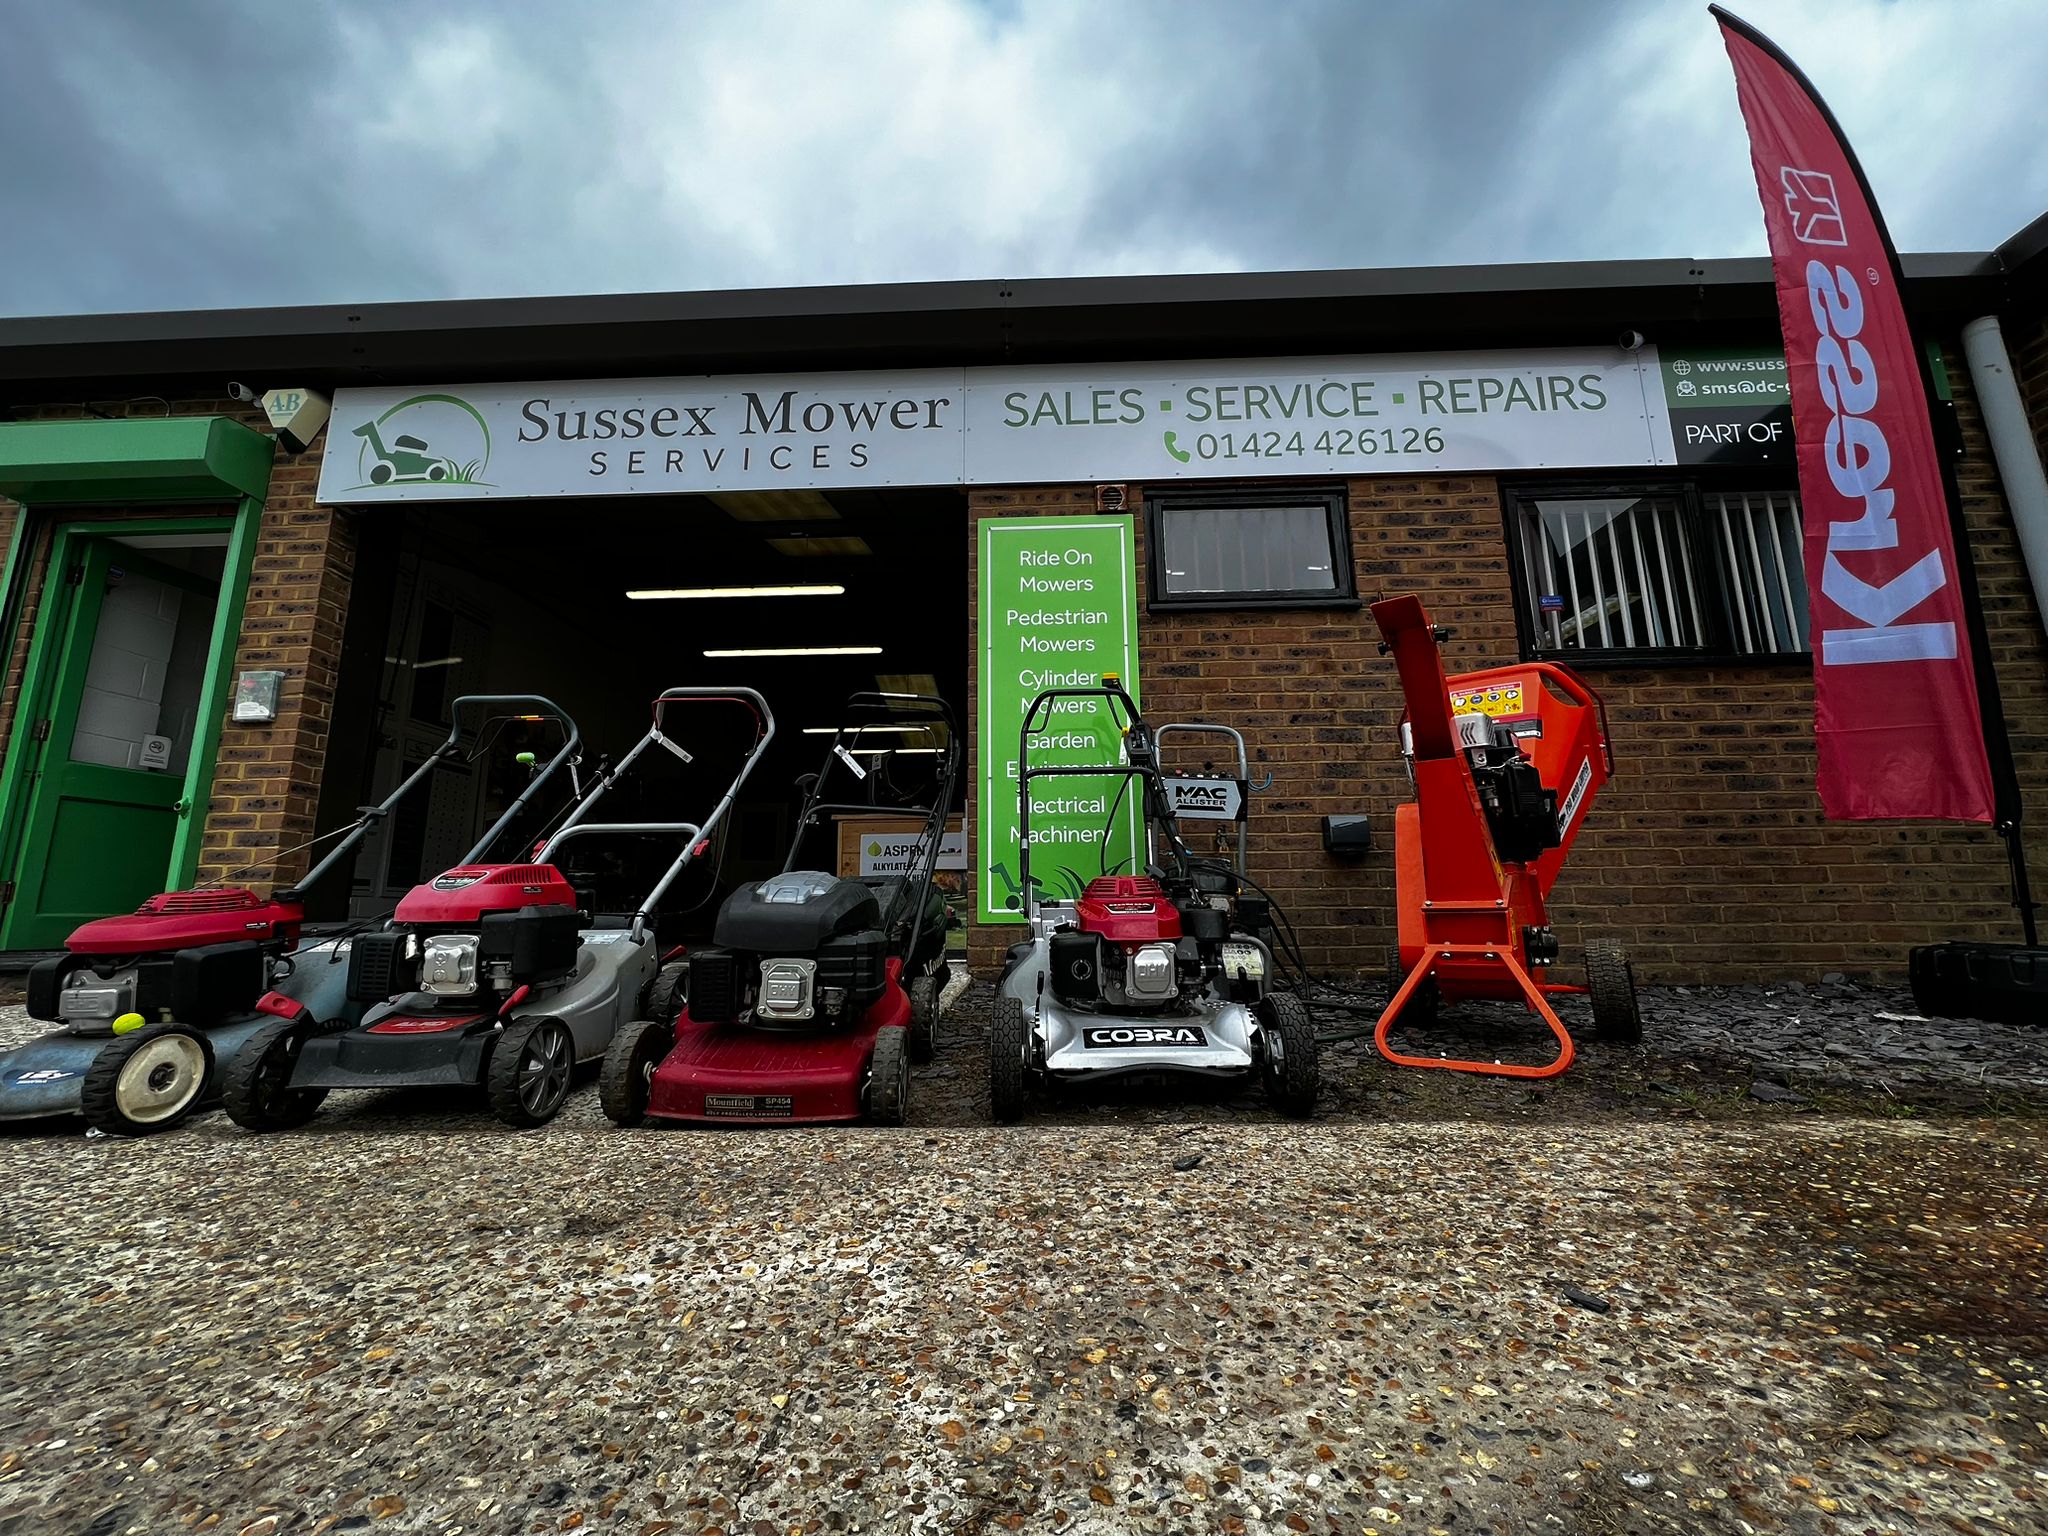 Sussex Mower Services showroom